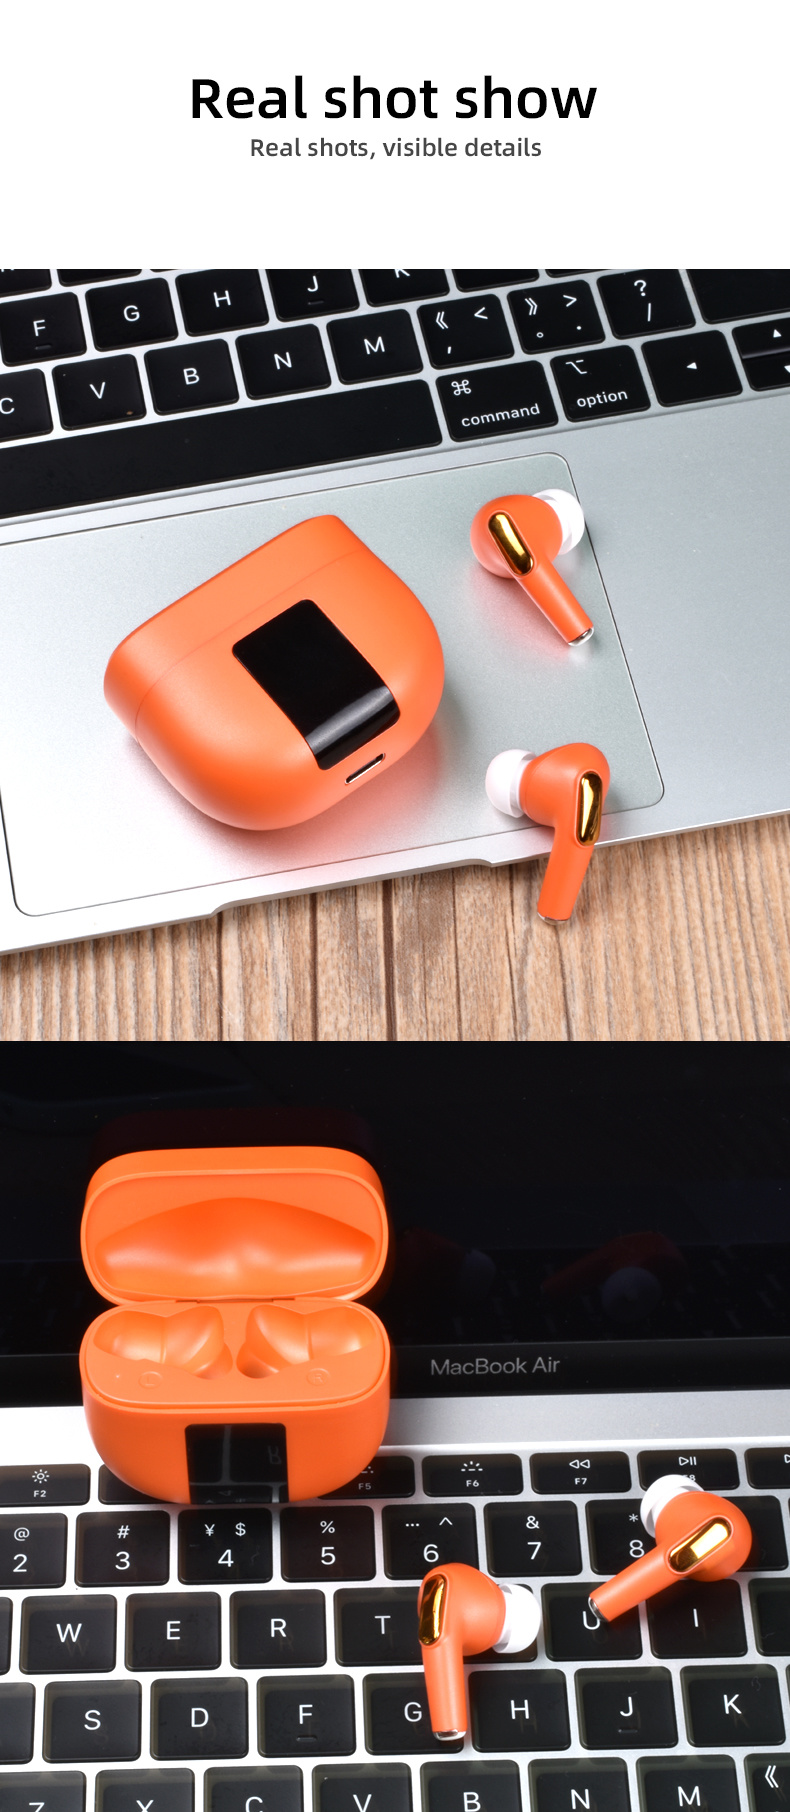 J68-TWS-bluetooth-50-Earphone-LED-Digital-Display-HiFi-Touch-Control-Wireless-Headsets-Earbuds-with--1910737-9